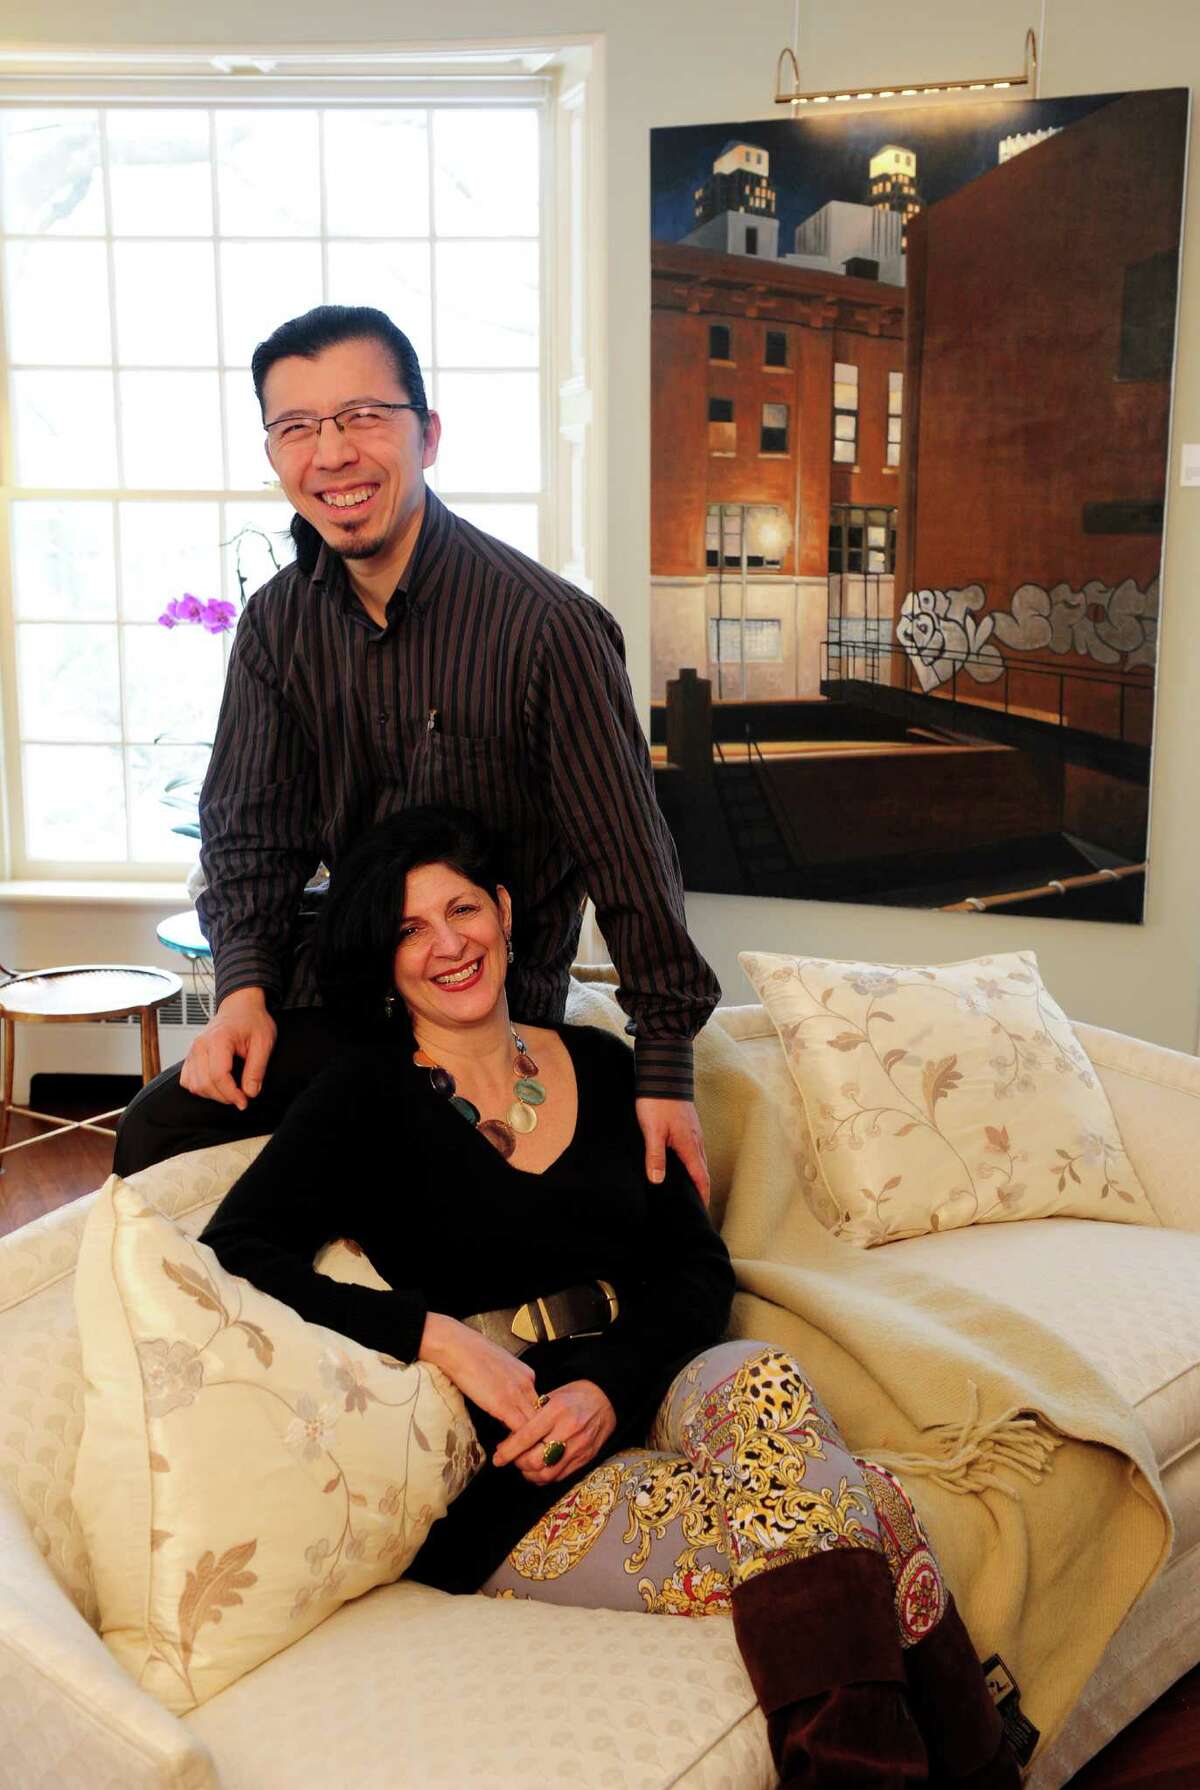 Jeanine Esposito and husband Frederic Chiu sit in front an oil painting by Duvian Montoya, "A New York Light," at their Westport home Tuesday, Feb. 26, 2013. The couple hosts art events in their home called Arts Immersion Salons, through their non-profit organization, Beechwood Arts.